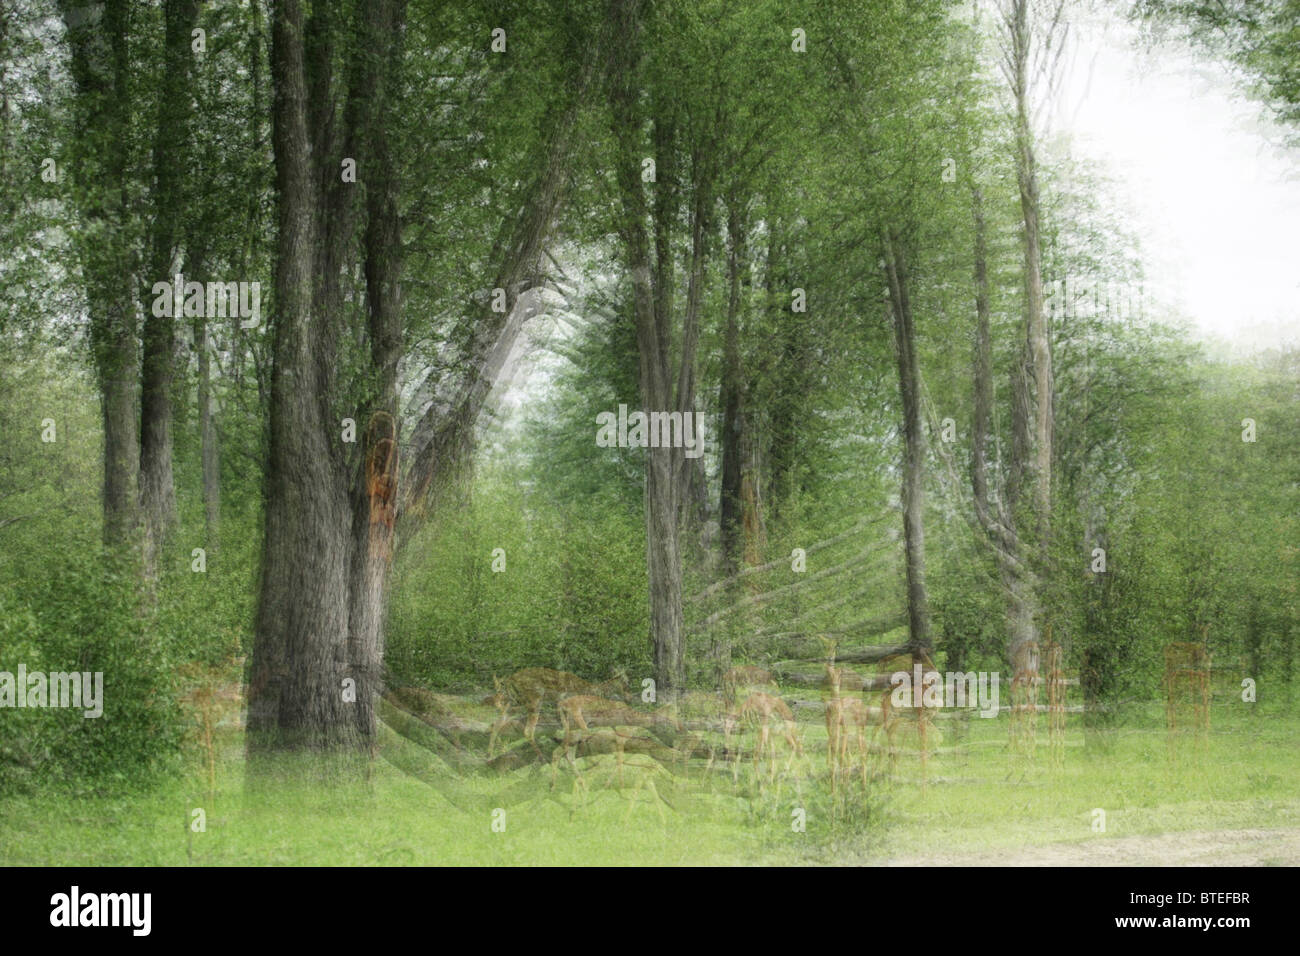 Trees and impalas - multiple exposure to give an abstract feel Stock Photo